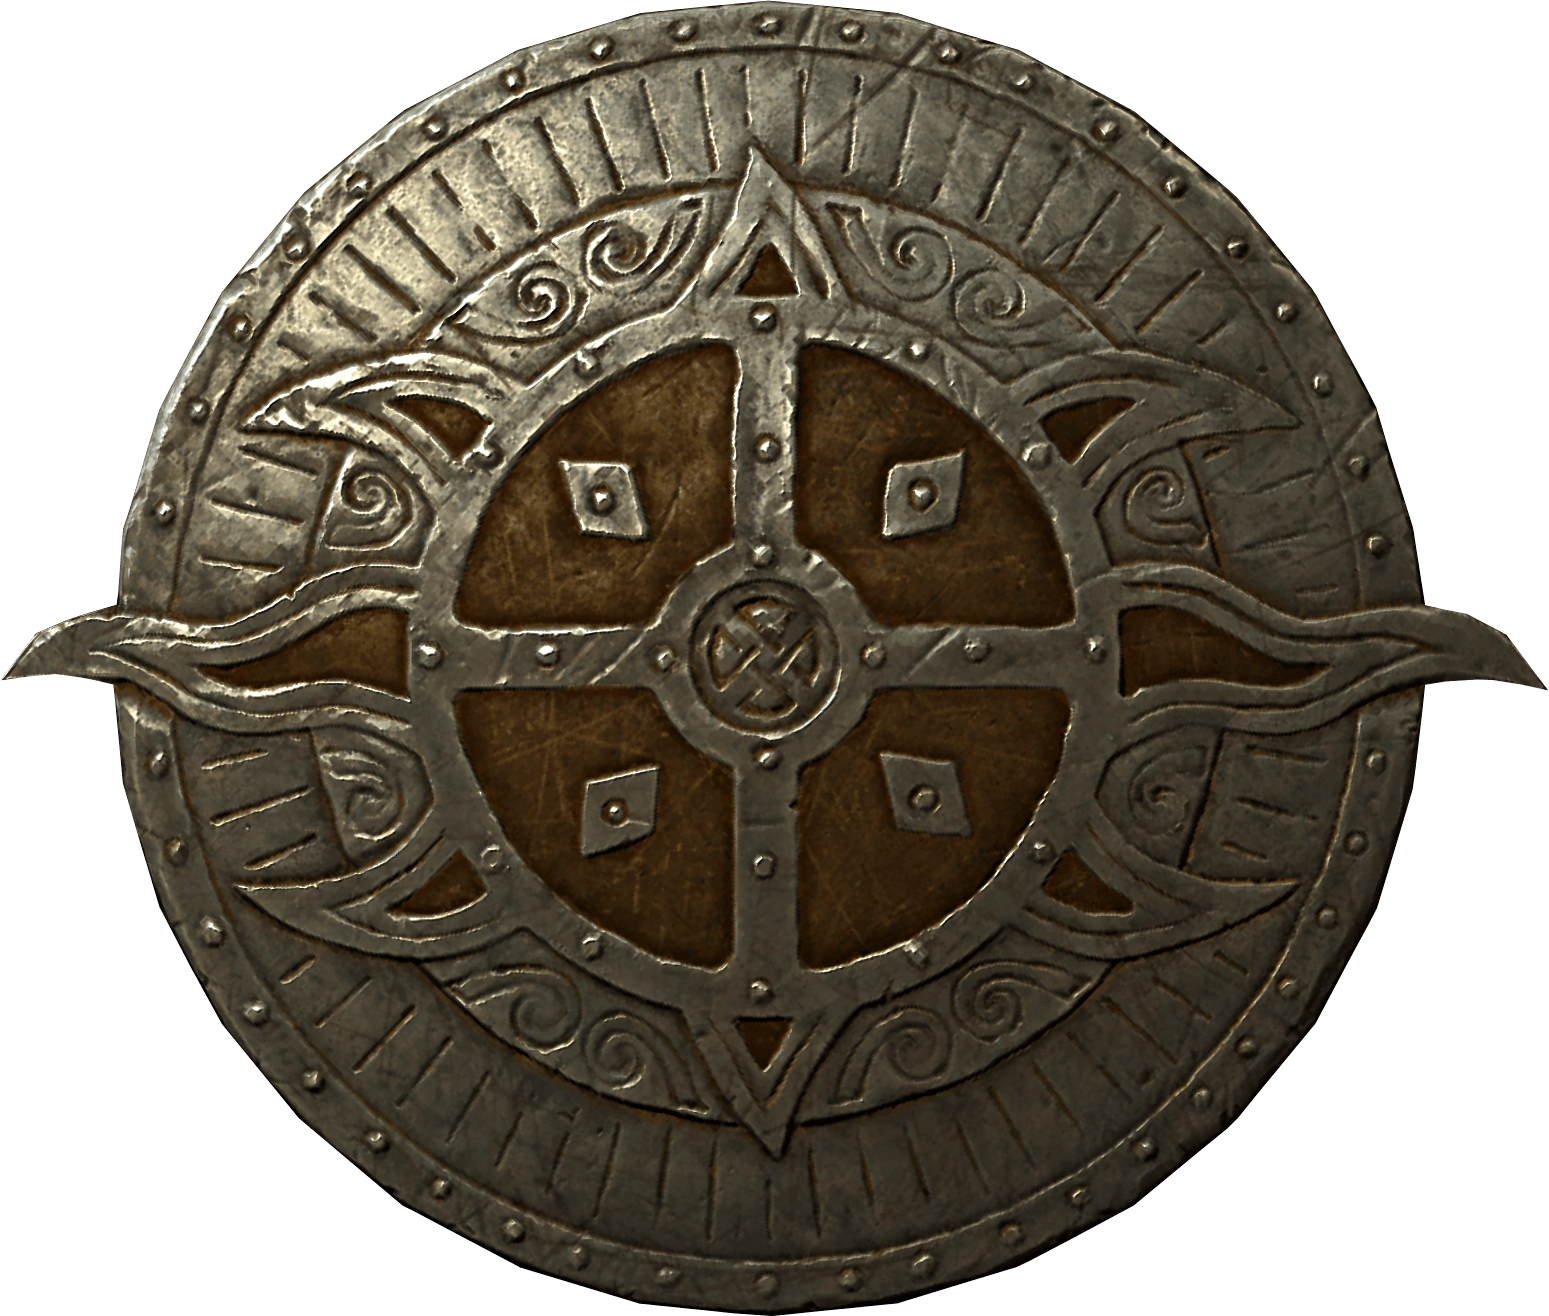 Old Shield Png Image Picture Download PNG Image